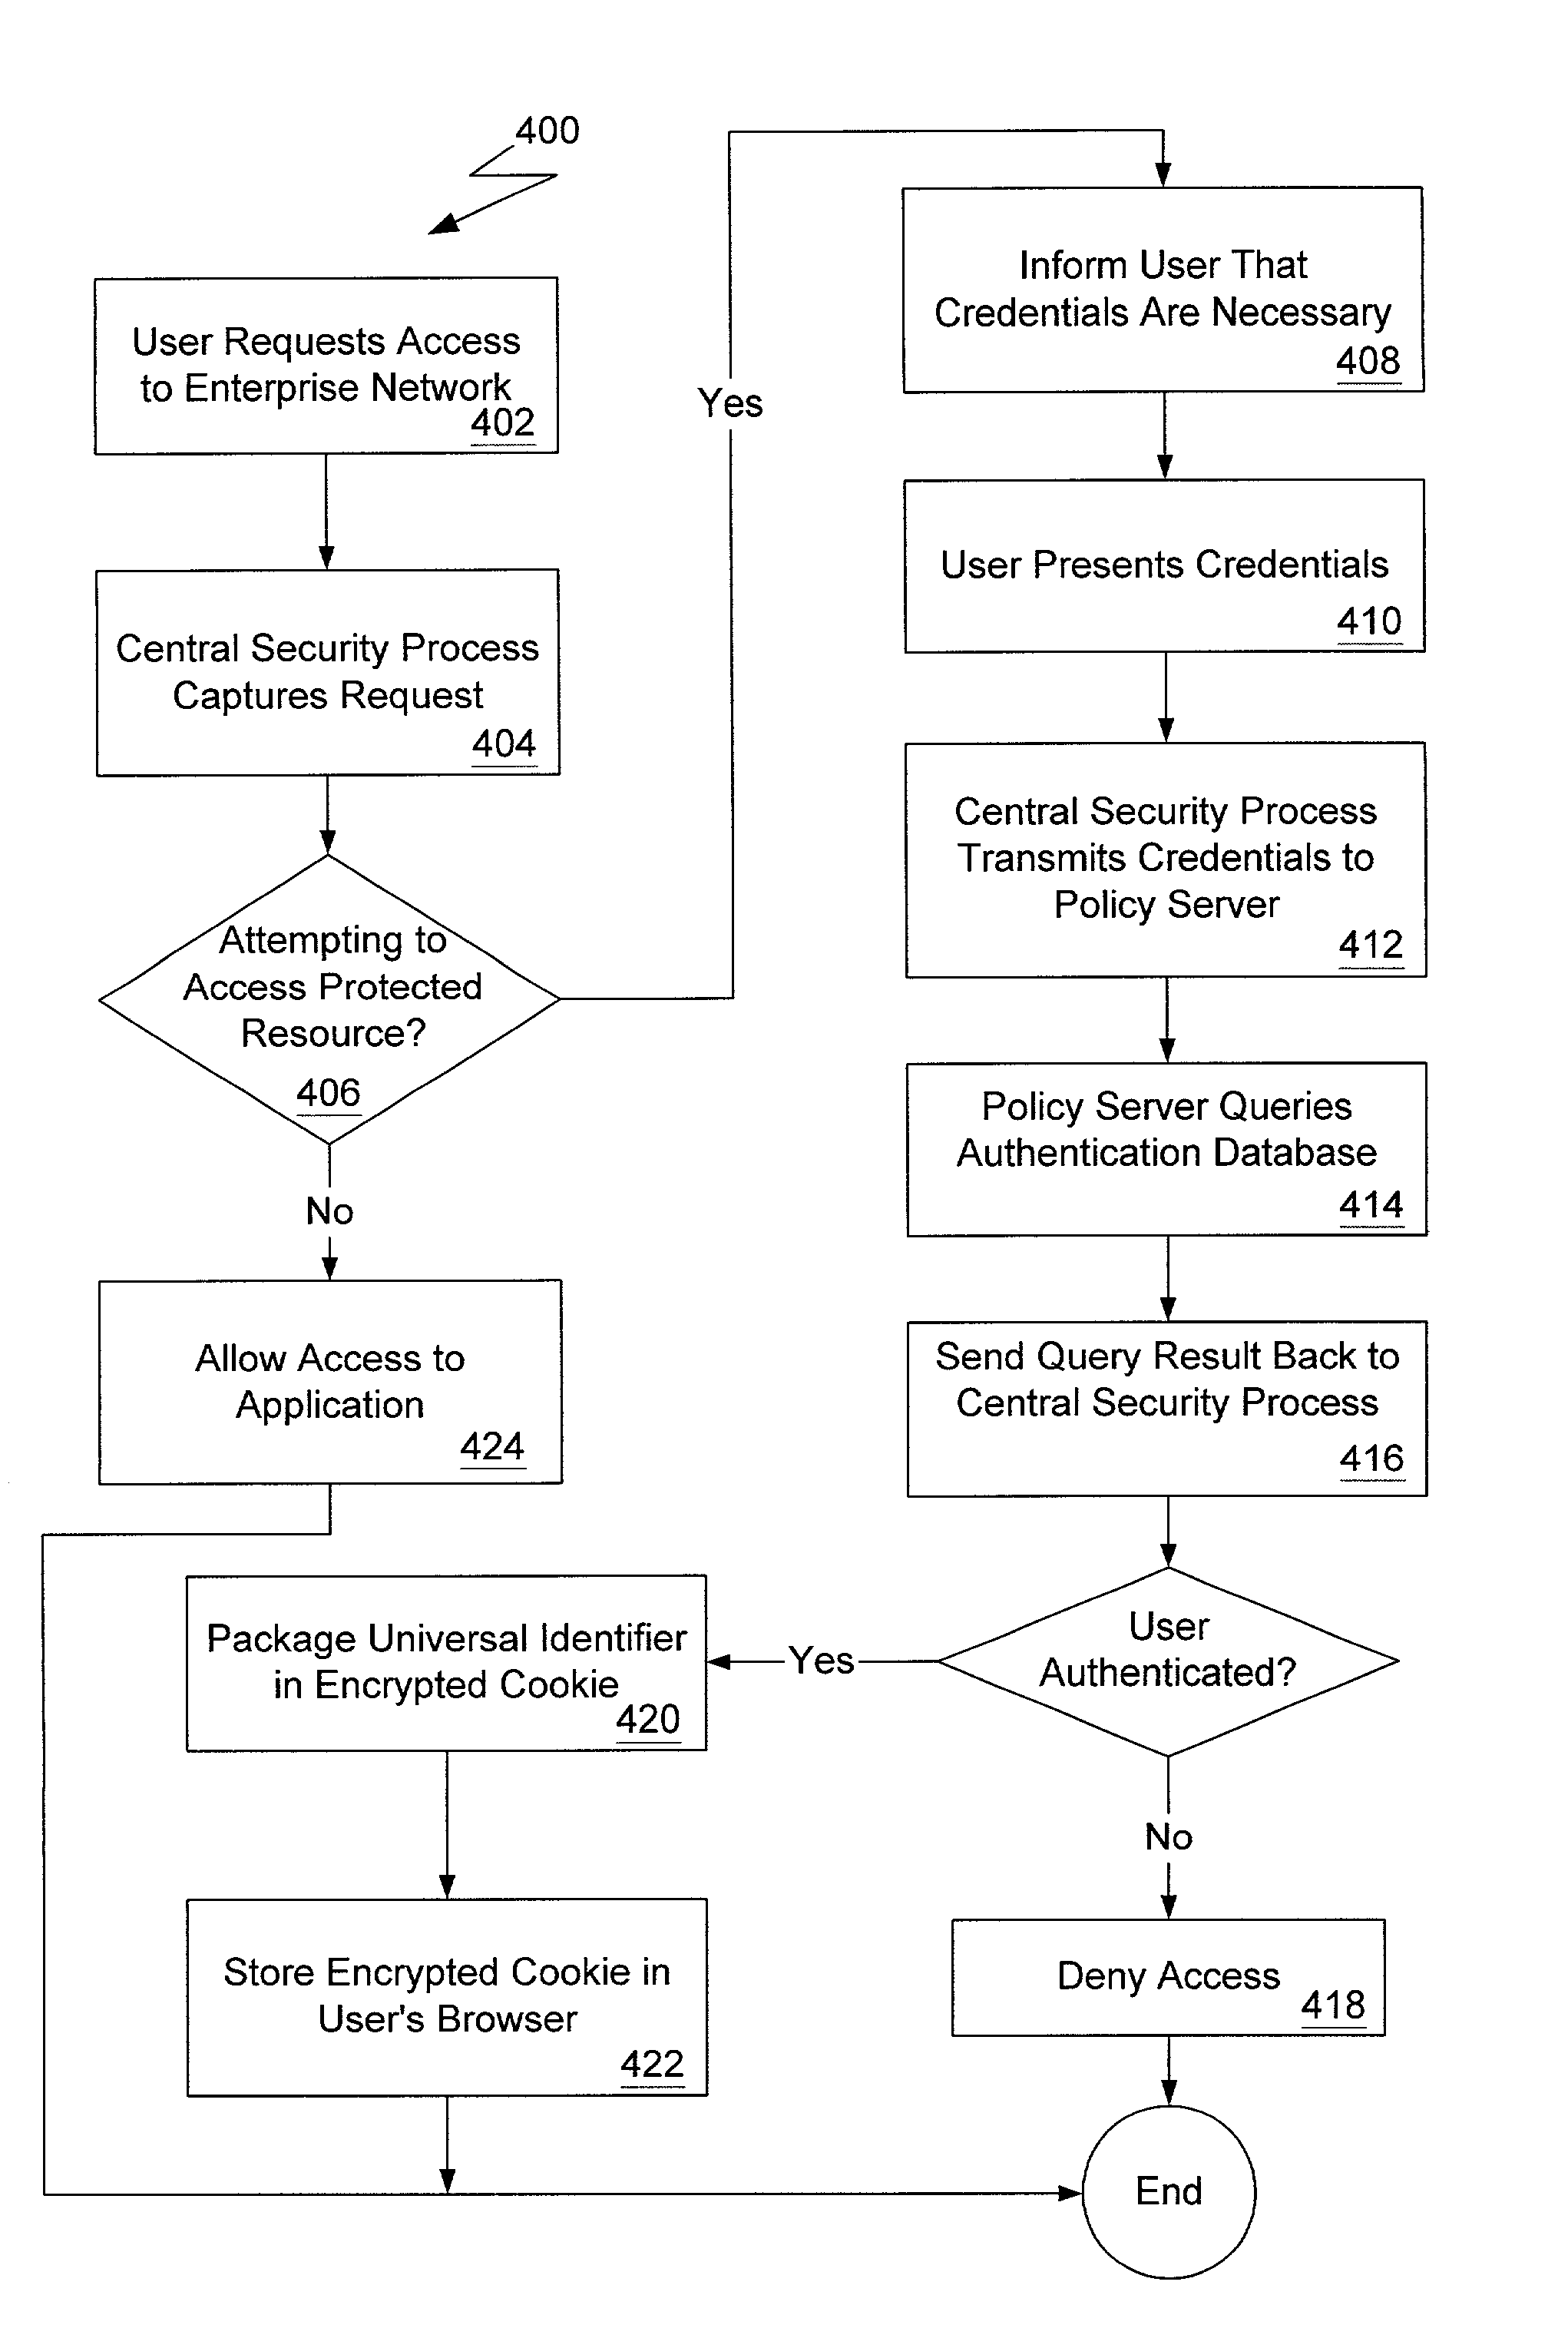 Authentication and authorization mapping for a computer network